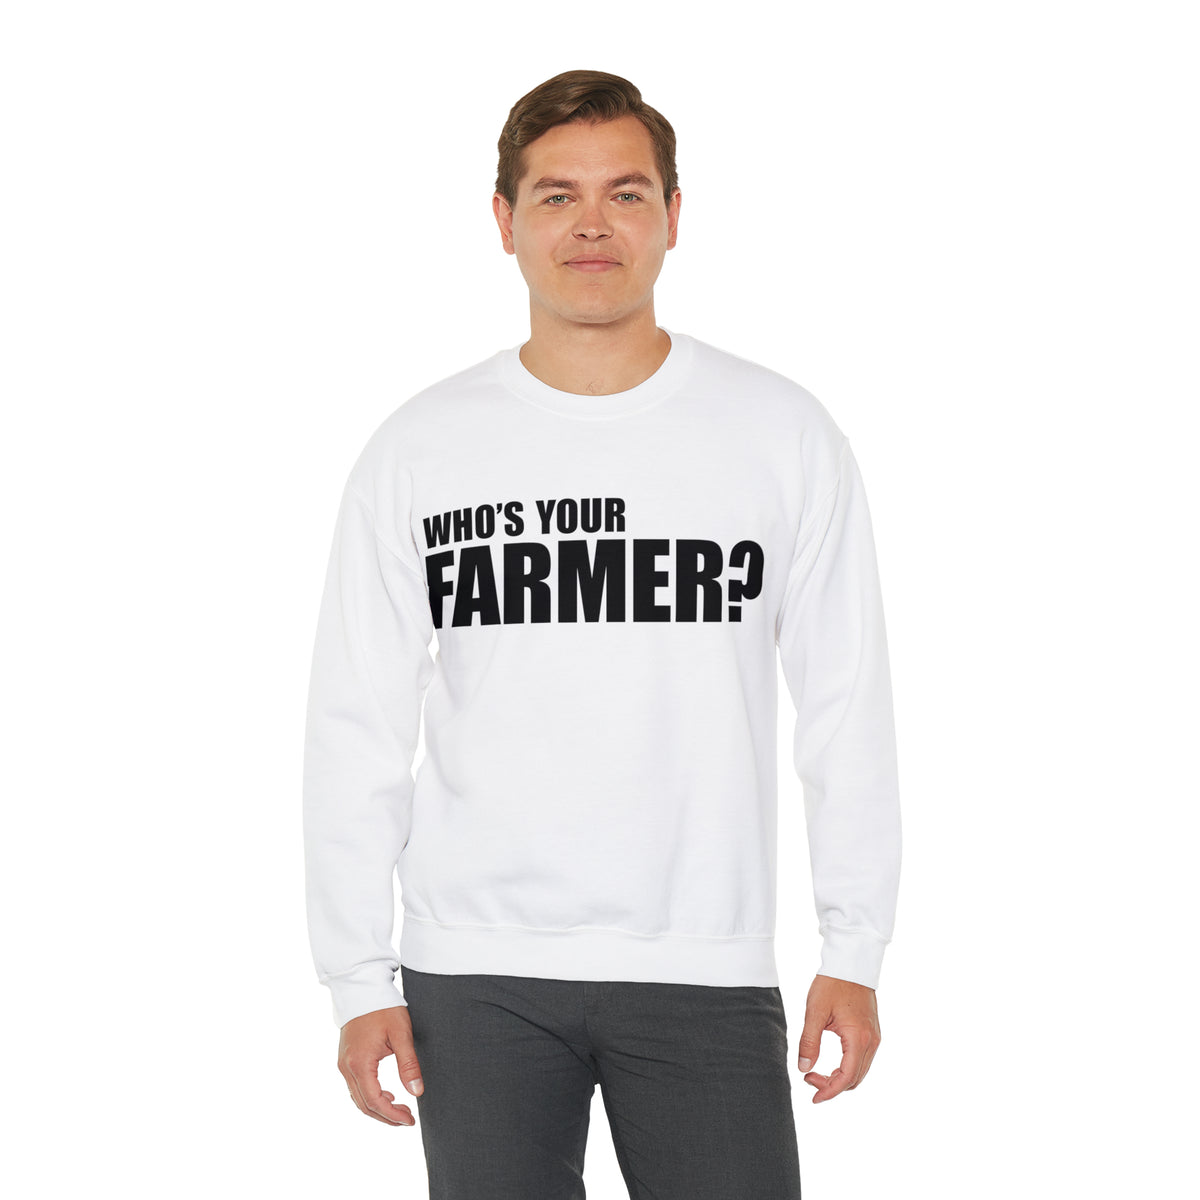 Who's your farmer?